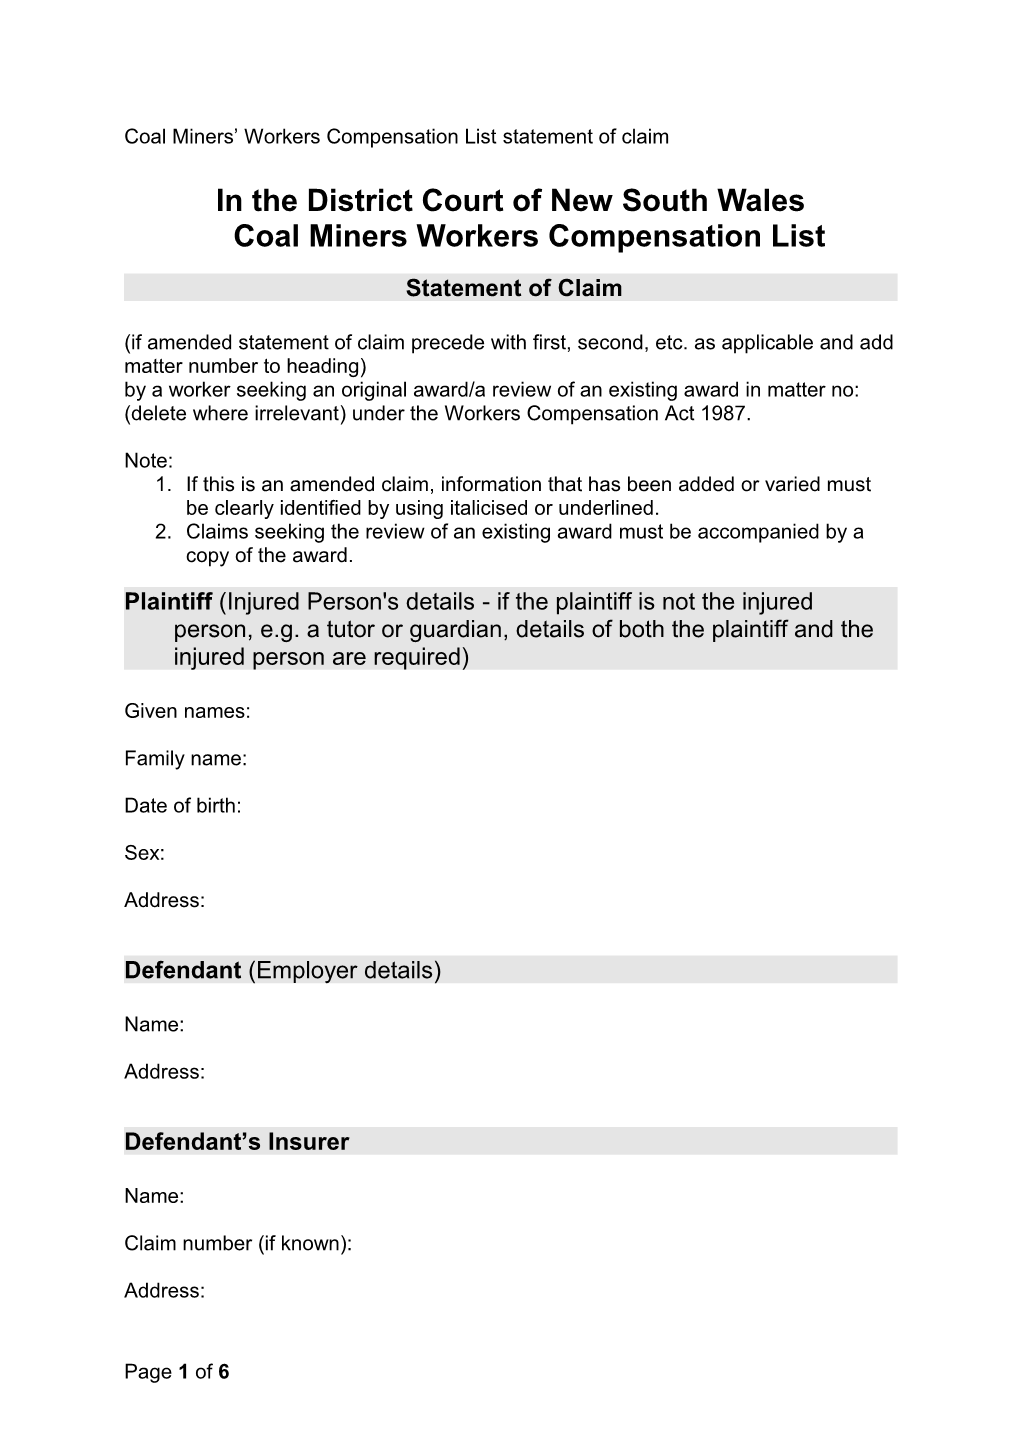 Coal Miners Workers Compensation Statement of Claim